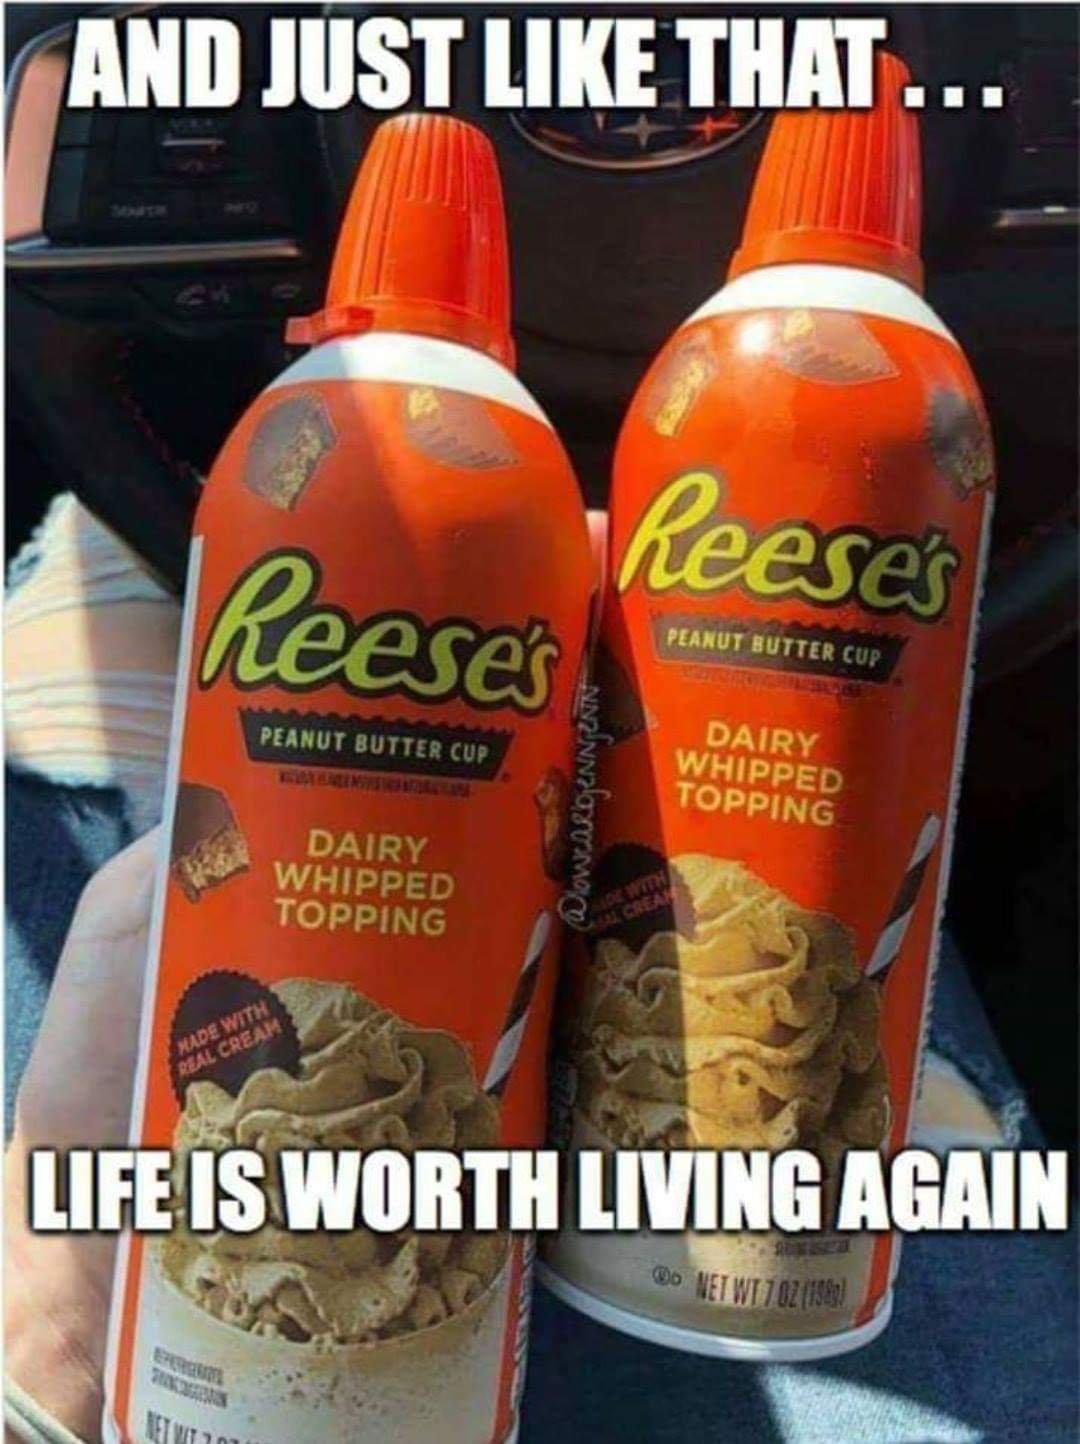 whipped cream memes - And Just That... heeses Reese's Peanut Butter Cup Peanut Butter Cup WowcasoENNINN Dairy Whipped Topping Dairy Whipped Topping Life Is Worth Living Again Do Netwit.021583 Vt Vt 21